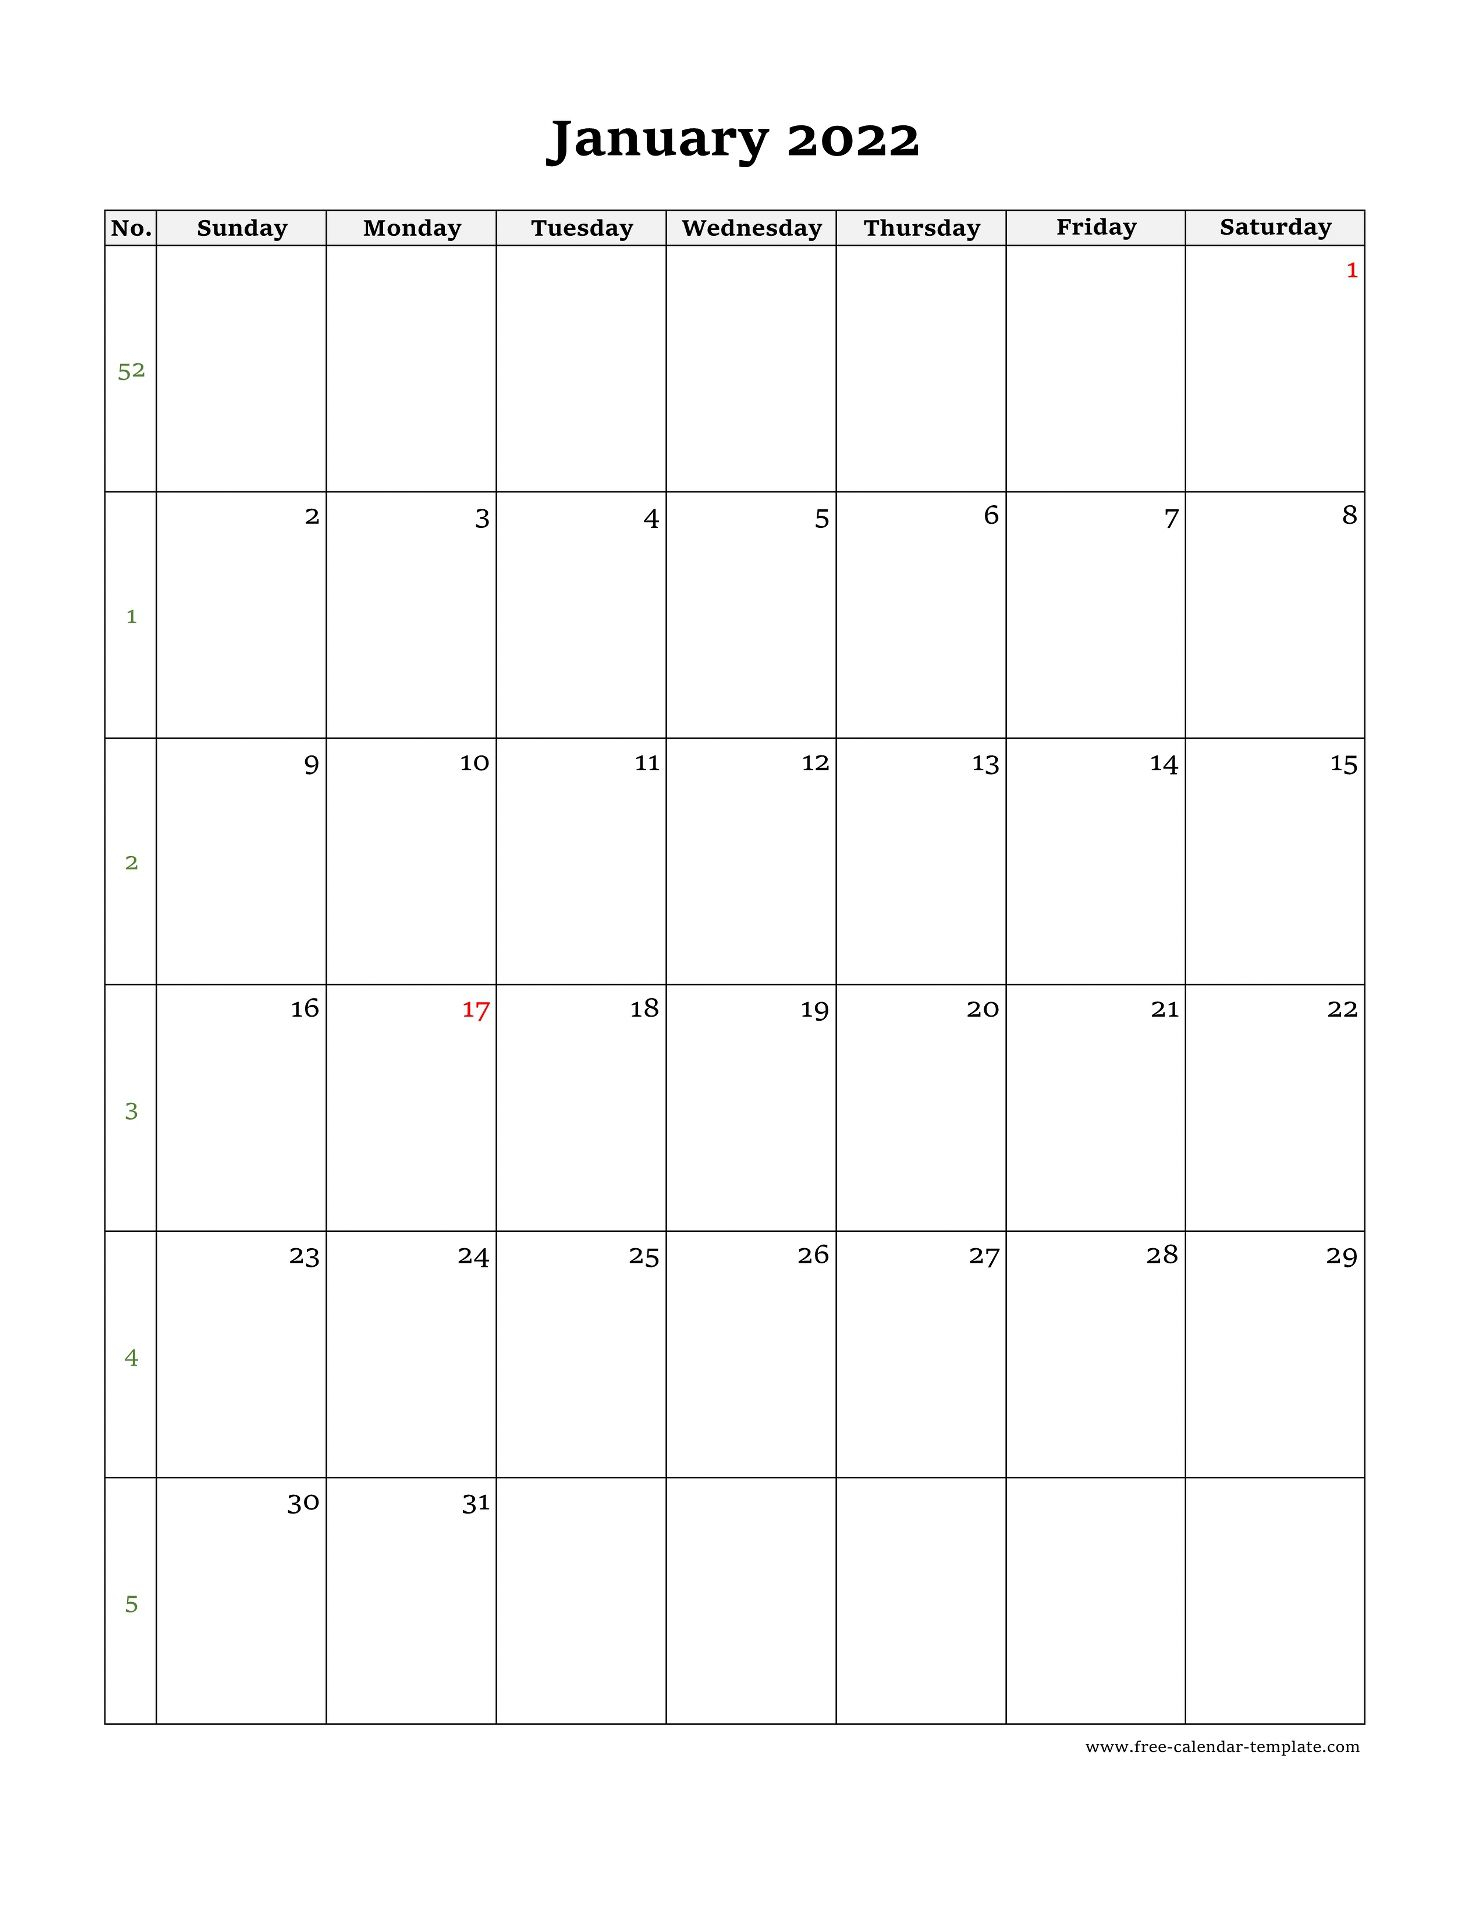 Monthly Calendar 2022 Simple Design With Large Box On Each Day For with regard to Blank 2022 Calendar Printable Free Pdf